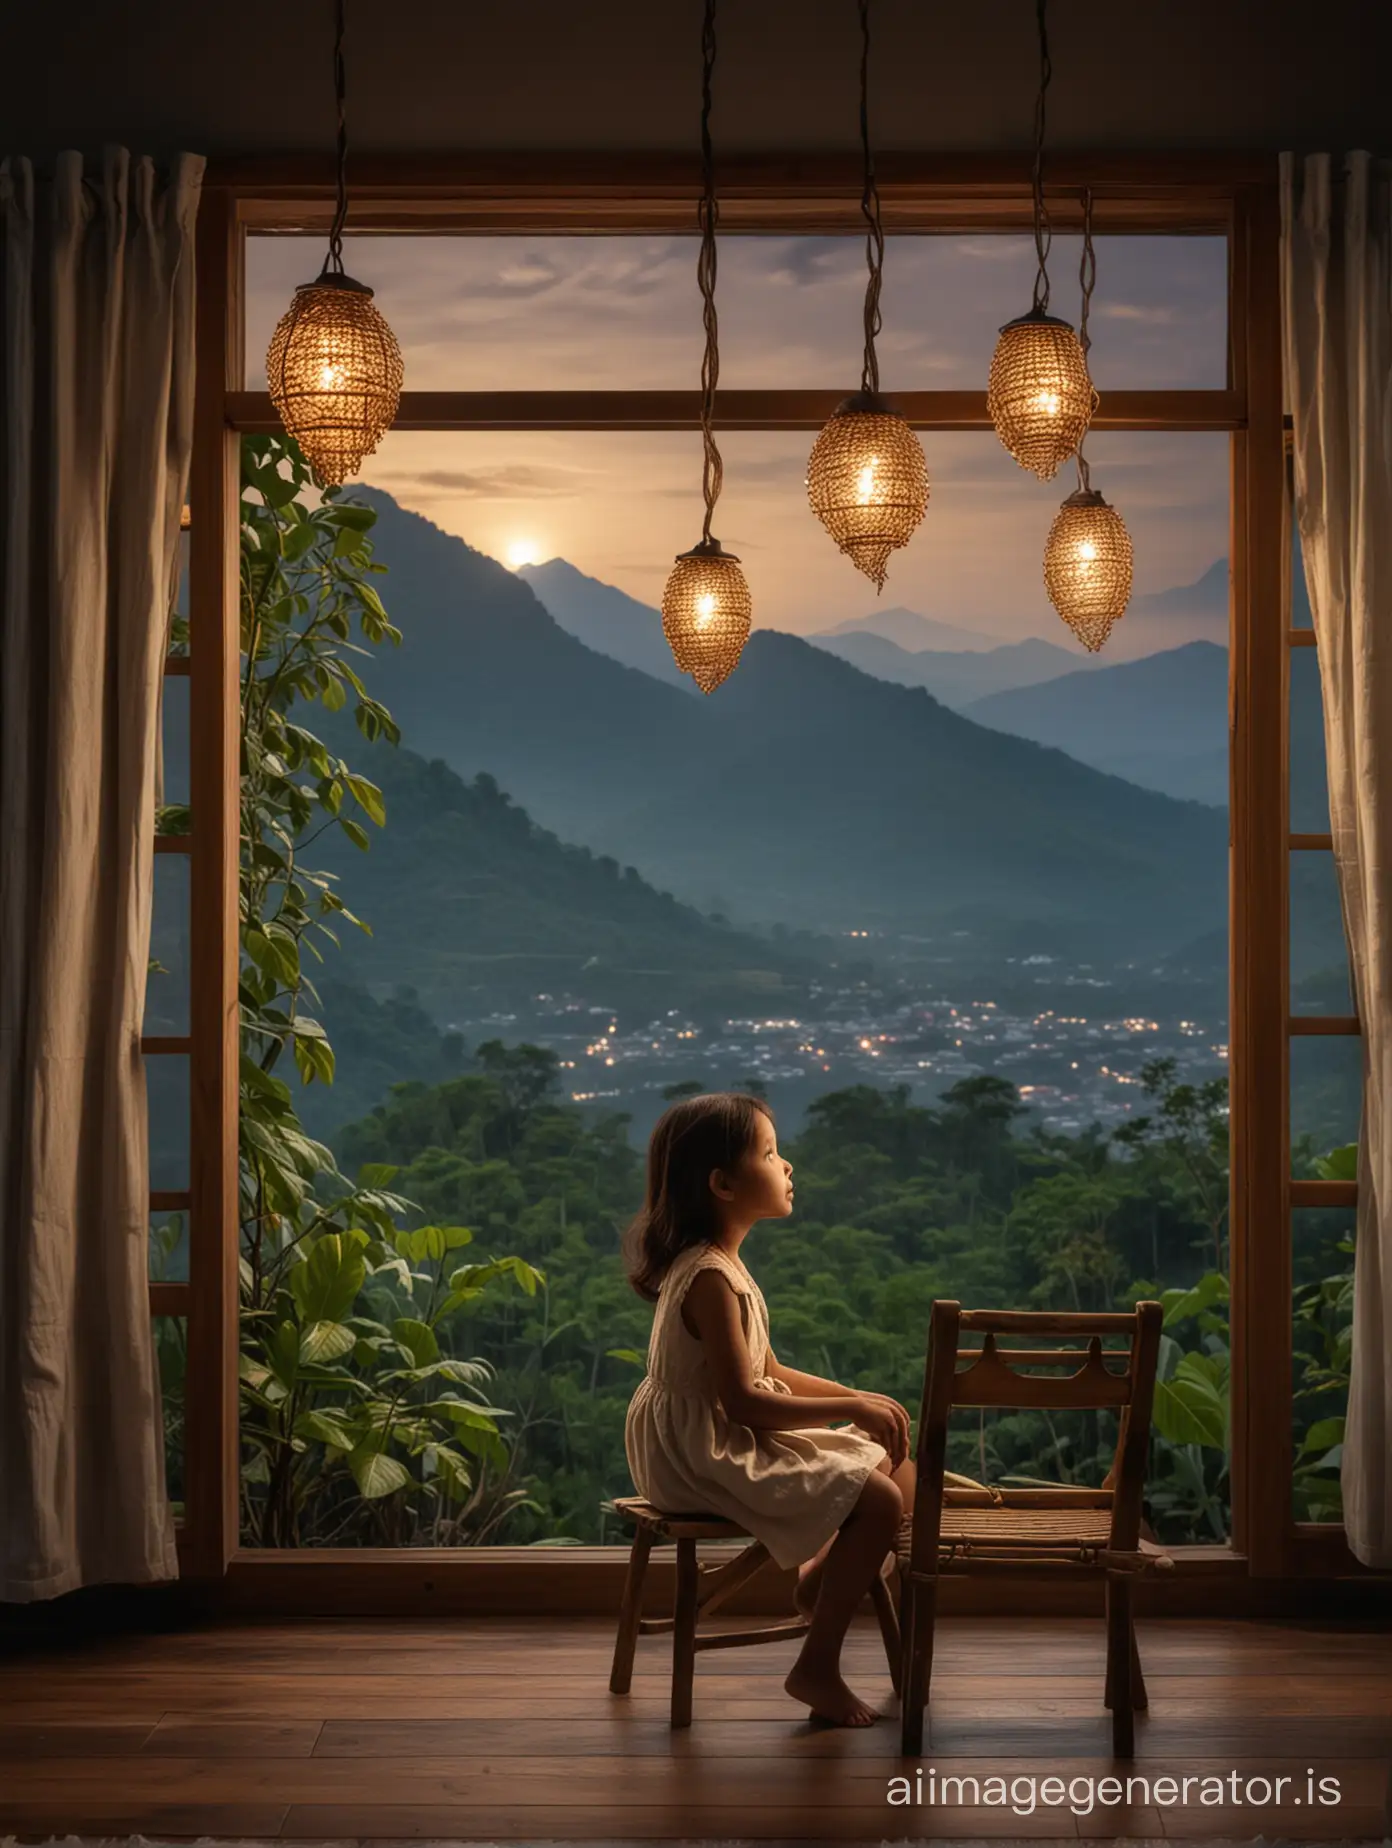 Contemplative-Indonesian-Girl-Sitting-on-Wooden-Chair-by-Window-at-Night